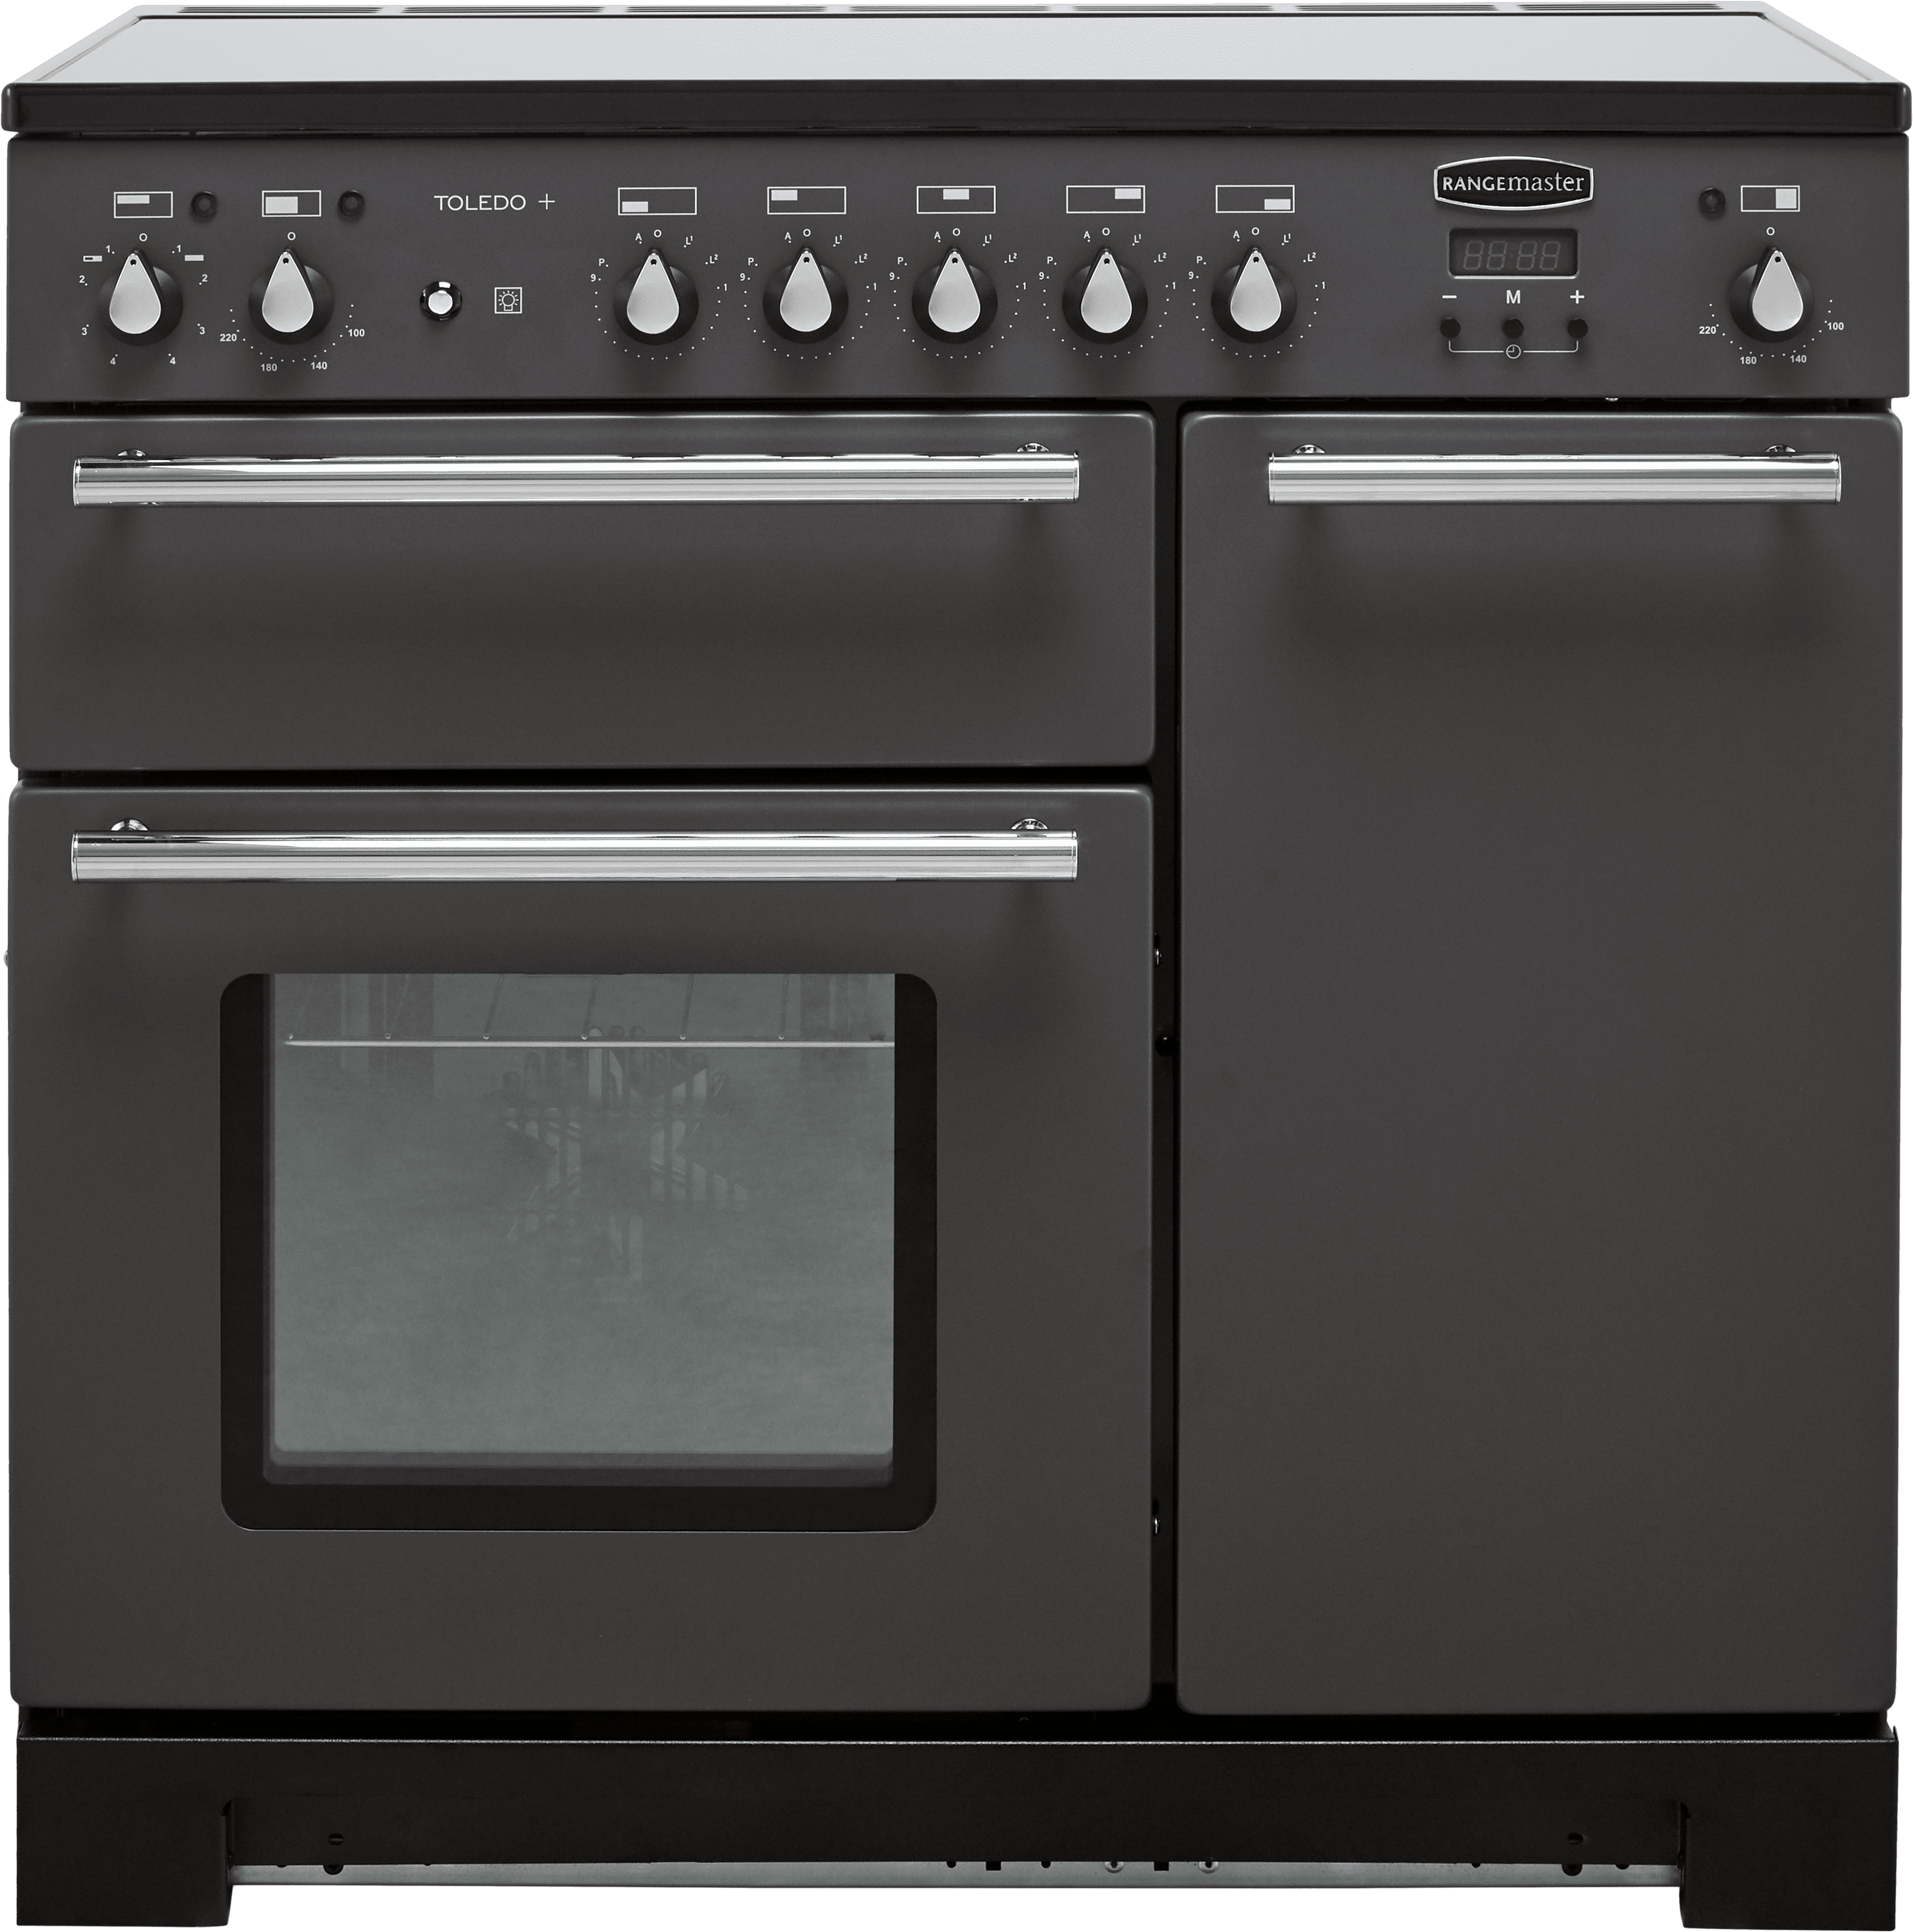 Rangemaster Toledo + TOLP90EISL/C 90cm Electric Range Cooker with Induction Hob - Slate - A/A Rated, Graphite